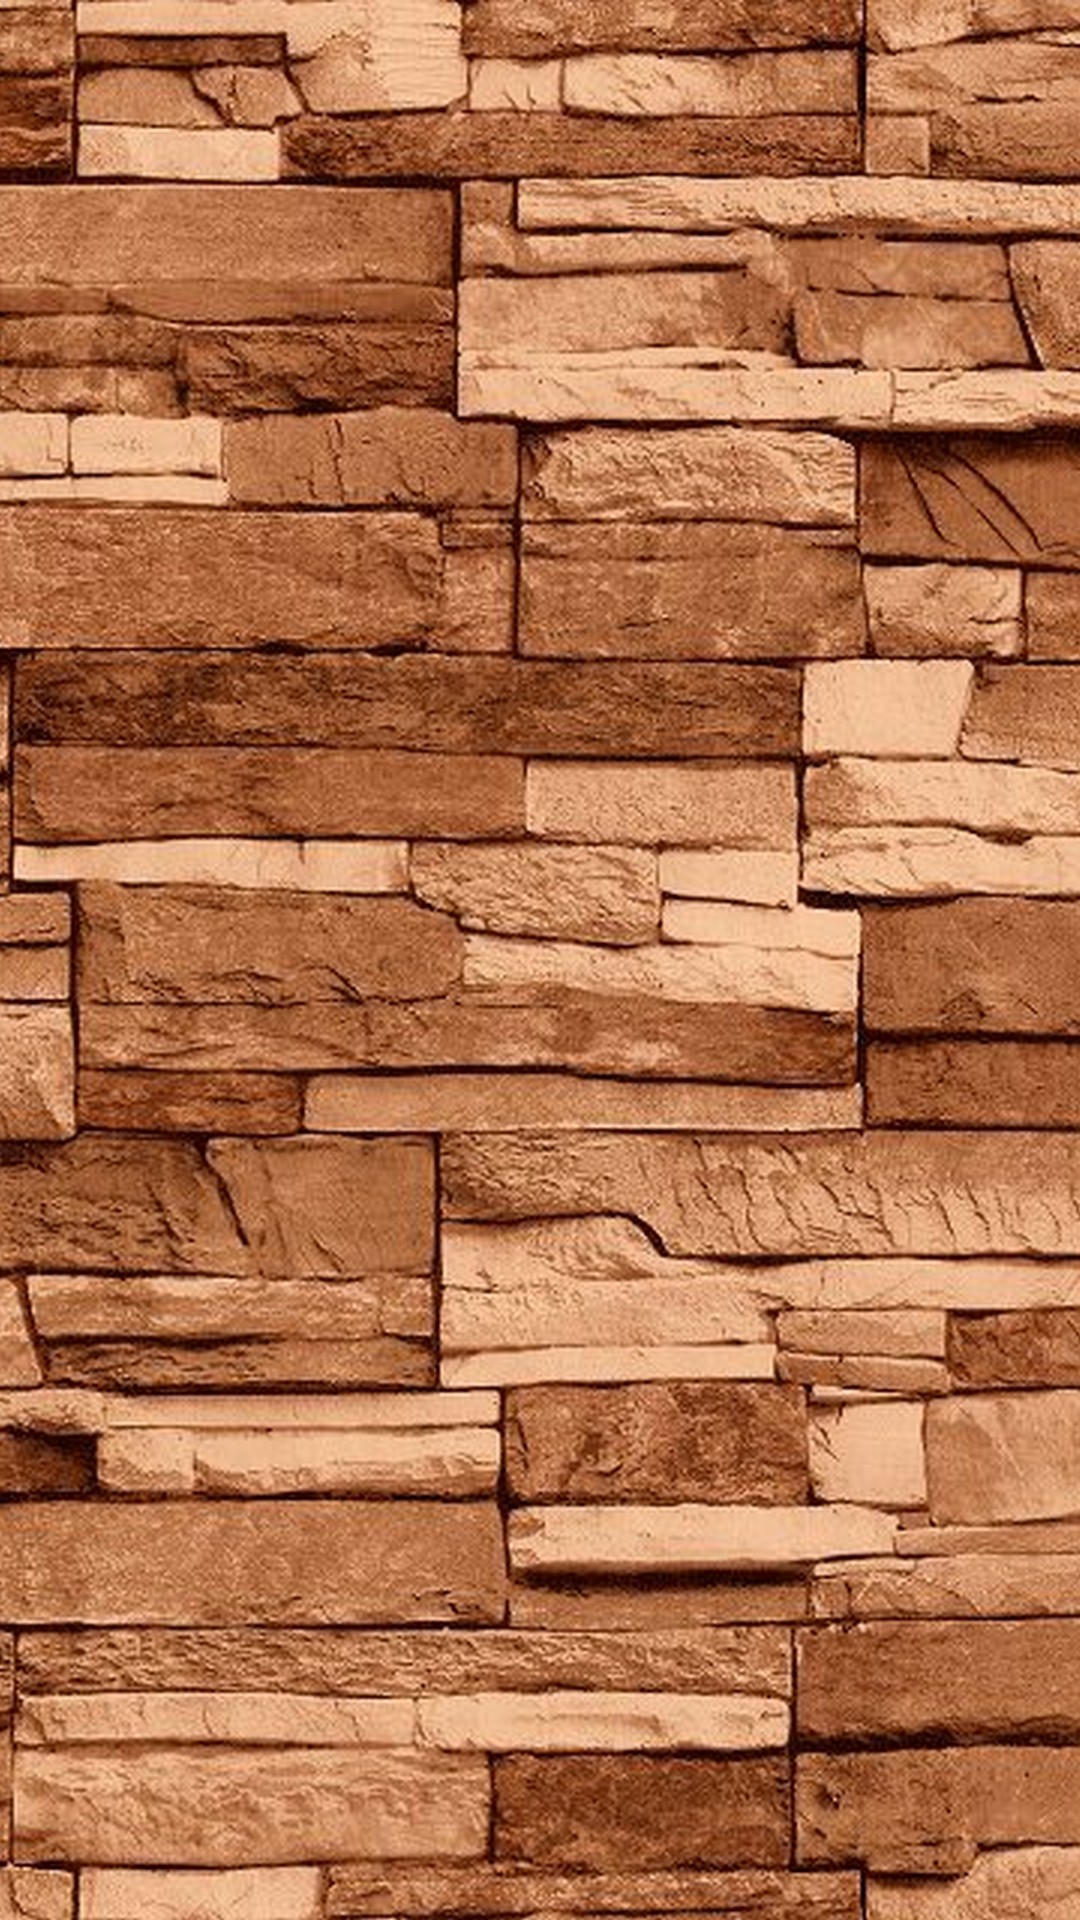 Brick HD Wallpapers For Android with high-resolution 1080x1920 pixel. You can use this wallpaper for your Android backgrounds, Tablet, Samsung Screensavers, Mobile Phone Lock Screen and another Smartphones device